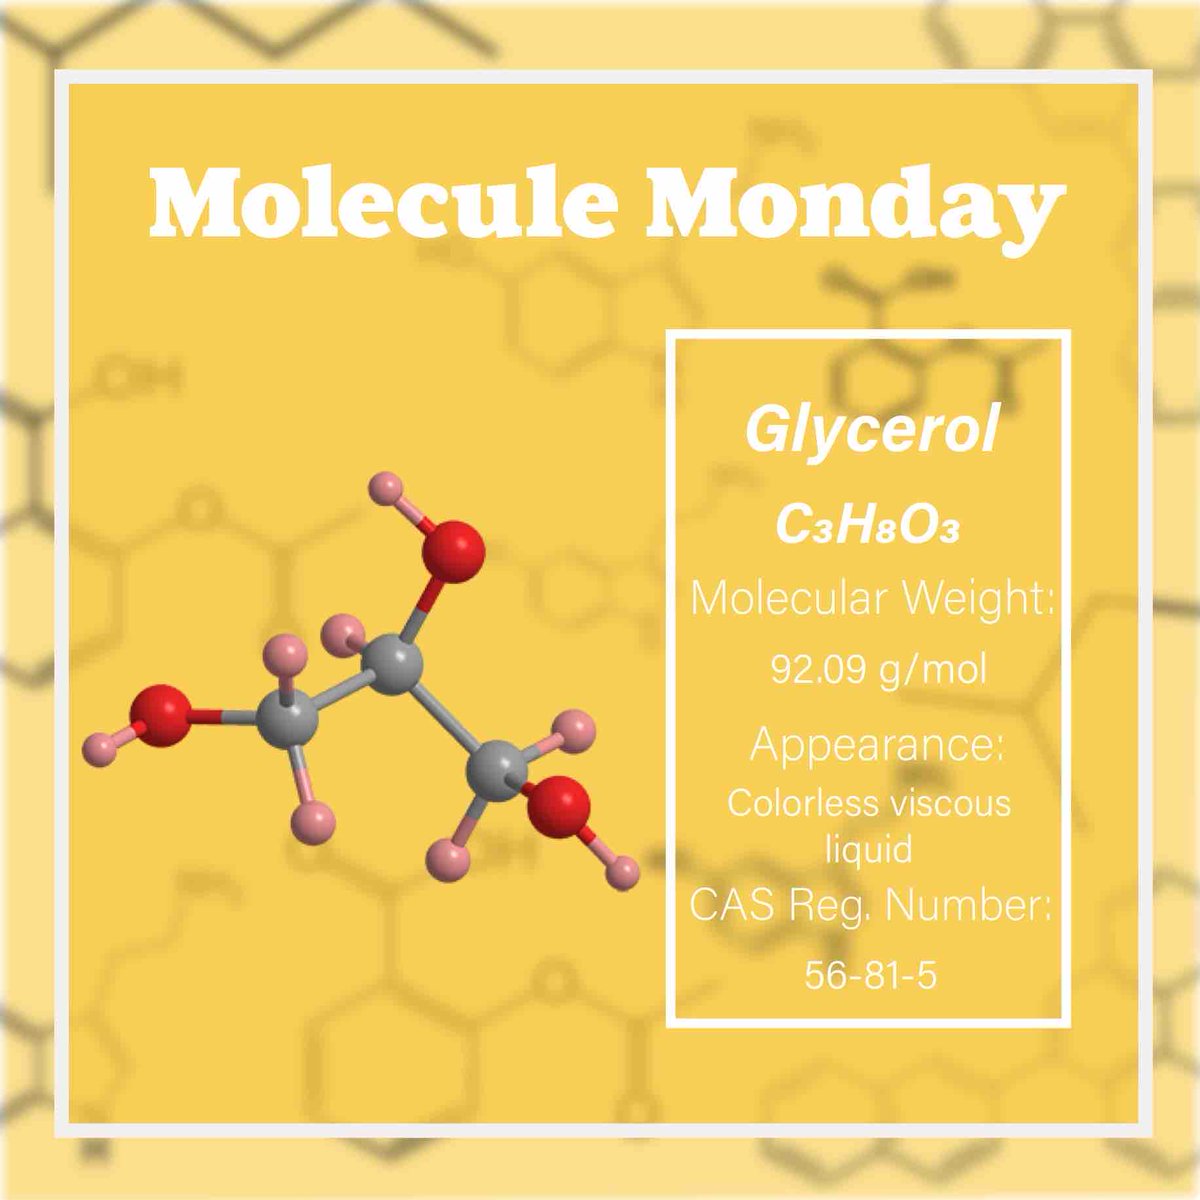 Do you know about glycerol, a molecule found almost anywhere you look? Learn more about this molecule at acs.org/molecule-of-th…. Images used in this post are from asc.org.